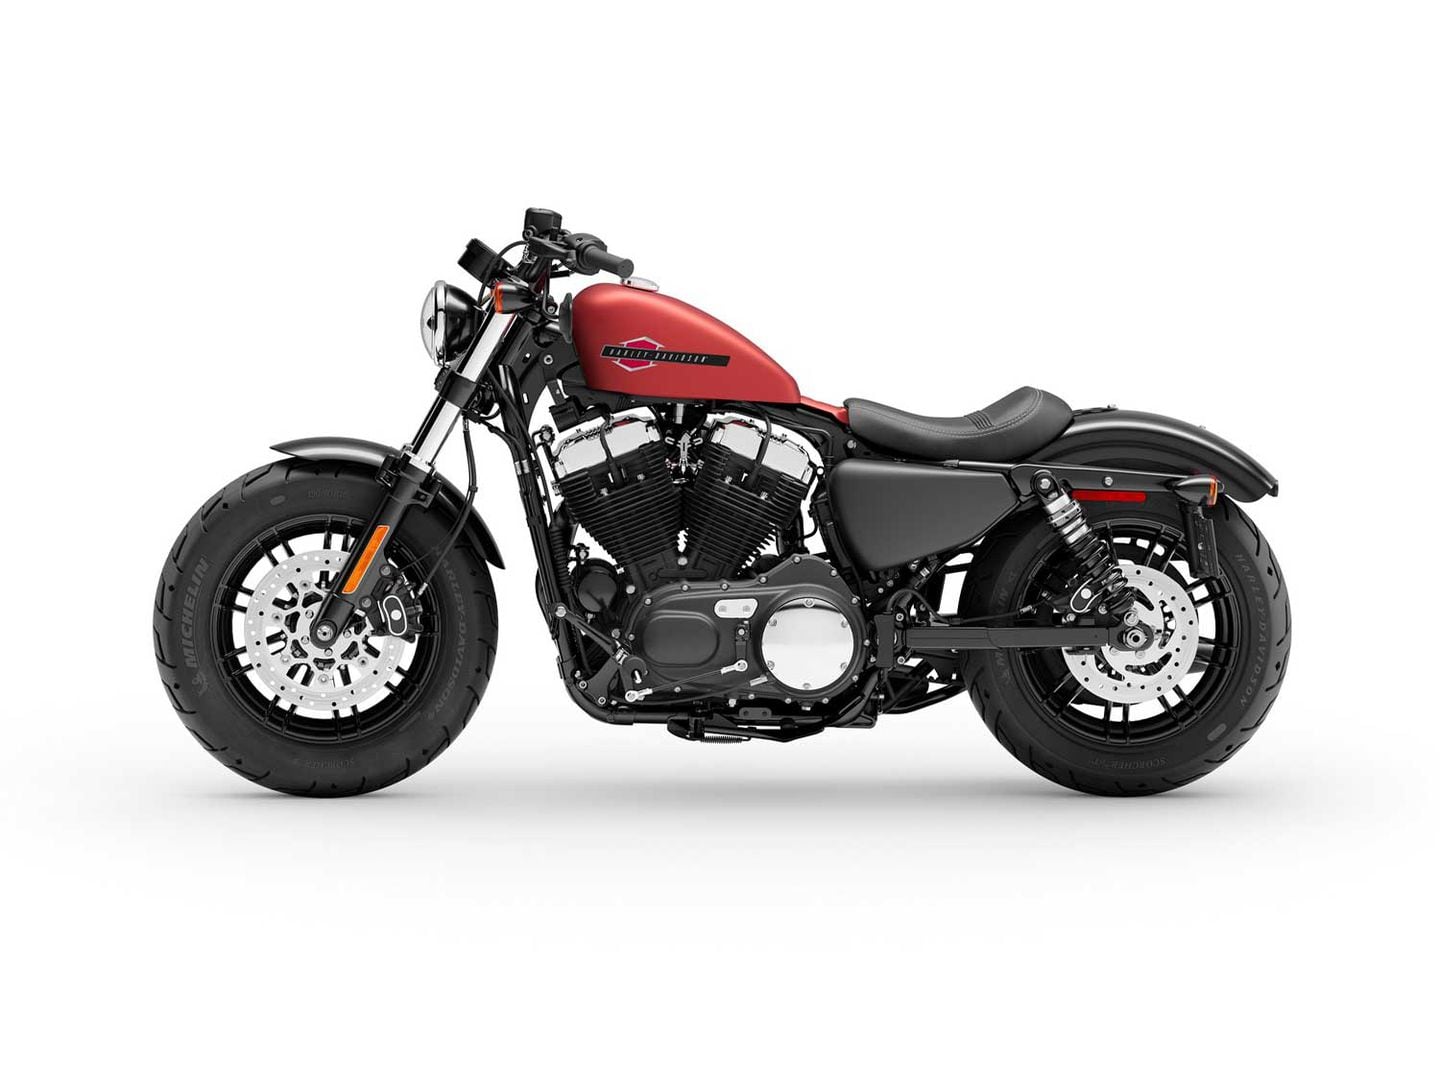 First Look At The 2020 Harley Davidson Sportster Lineup Motorcycle Cruiser